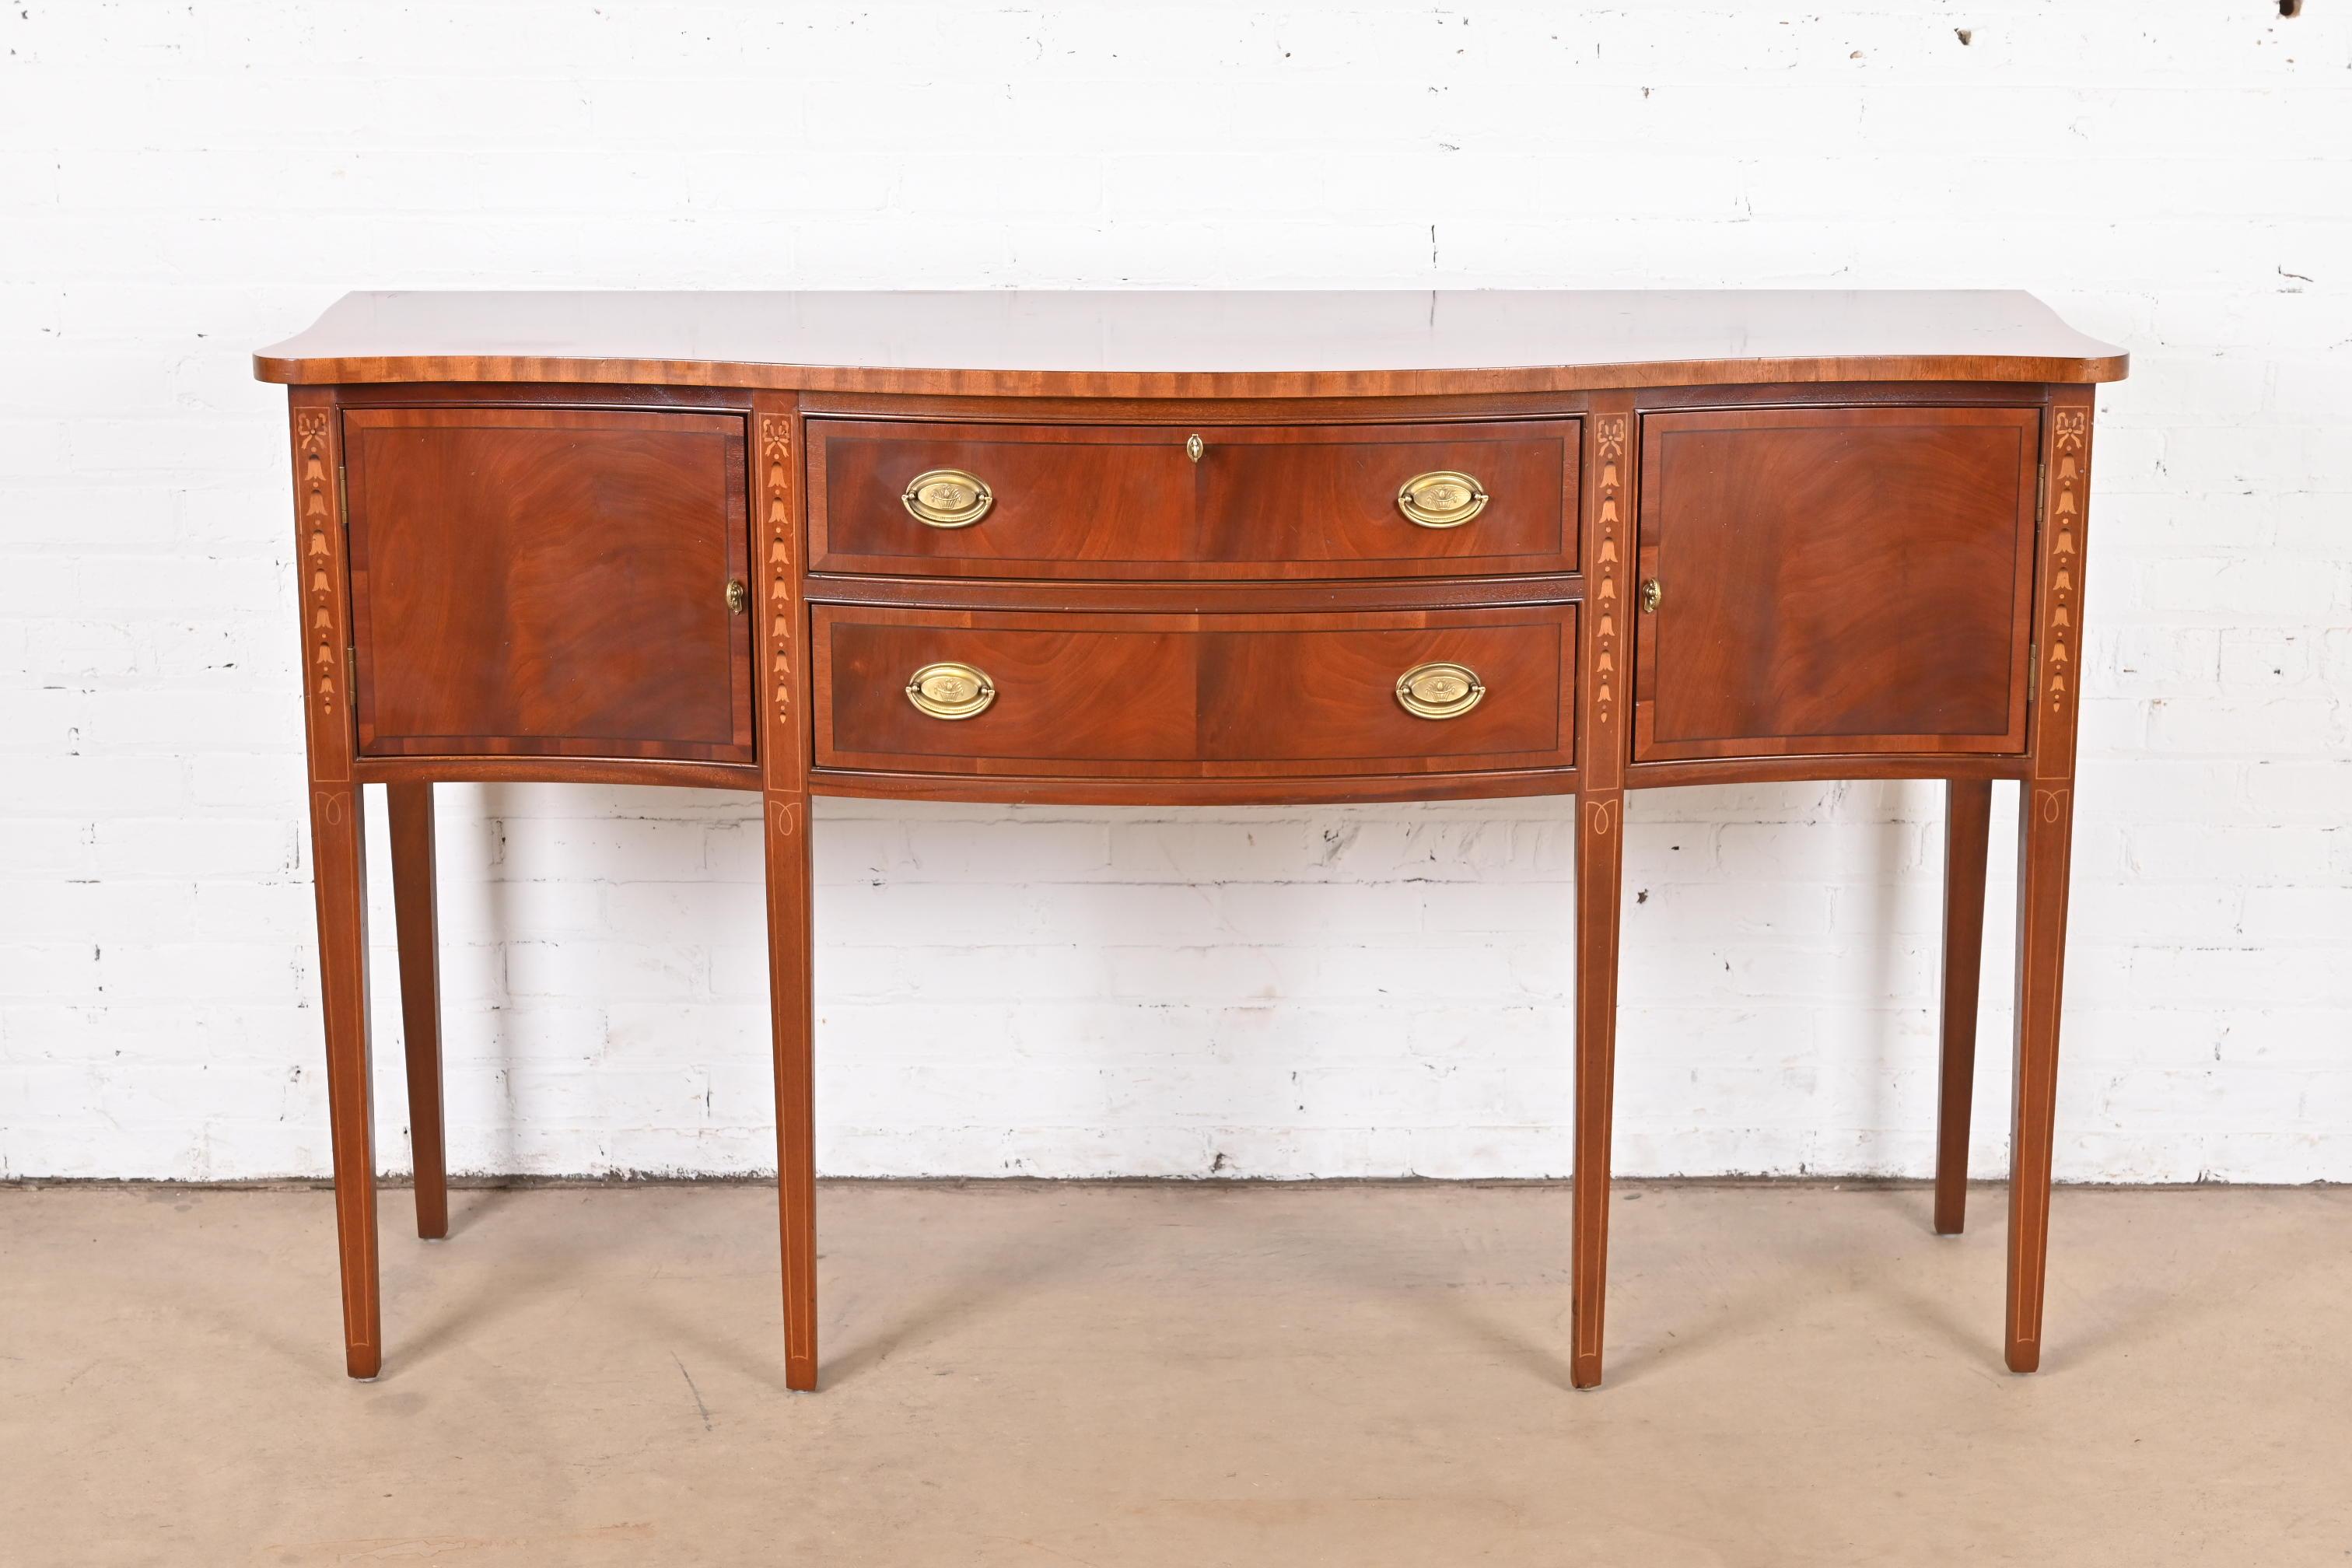 A gorgeous Hepplewhite or Federal style serpentine front sideboard, buffet, or credenza

USA, Late 20th Century

Flame mahogany, with inlaid satinwood marquetry and banding, and original brass hardware.

Measures: 65.5